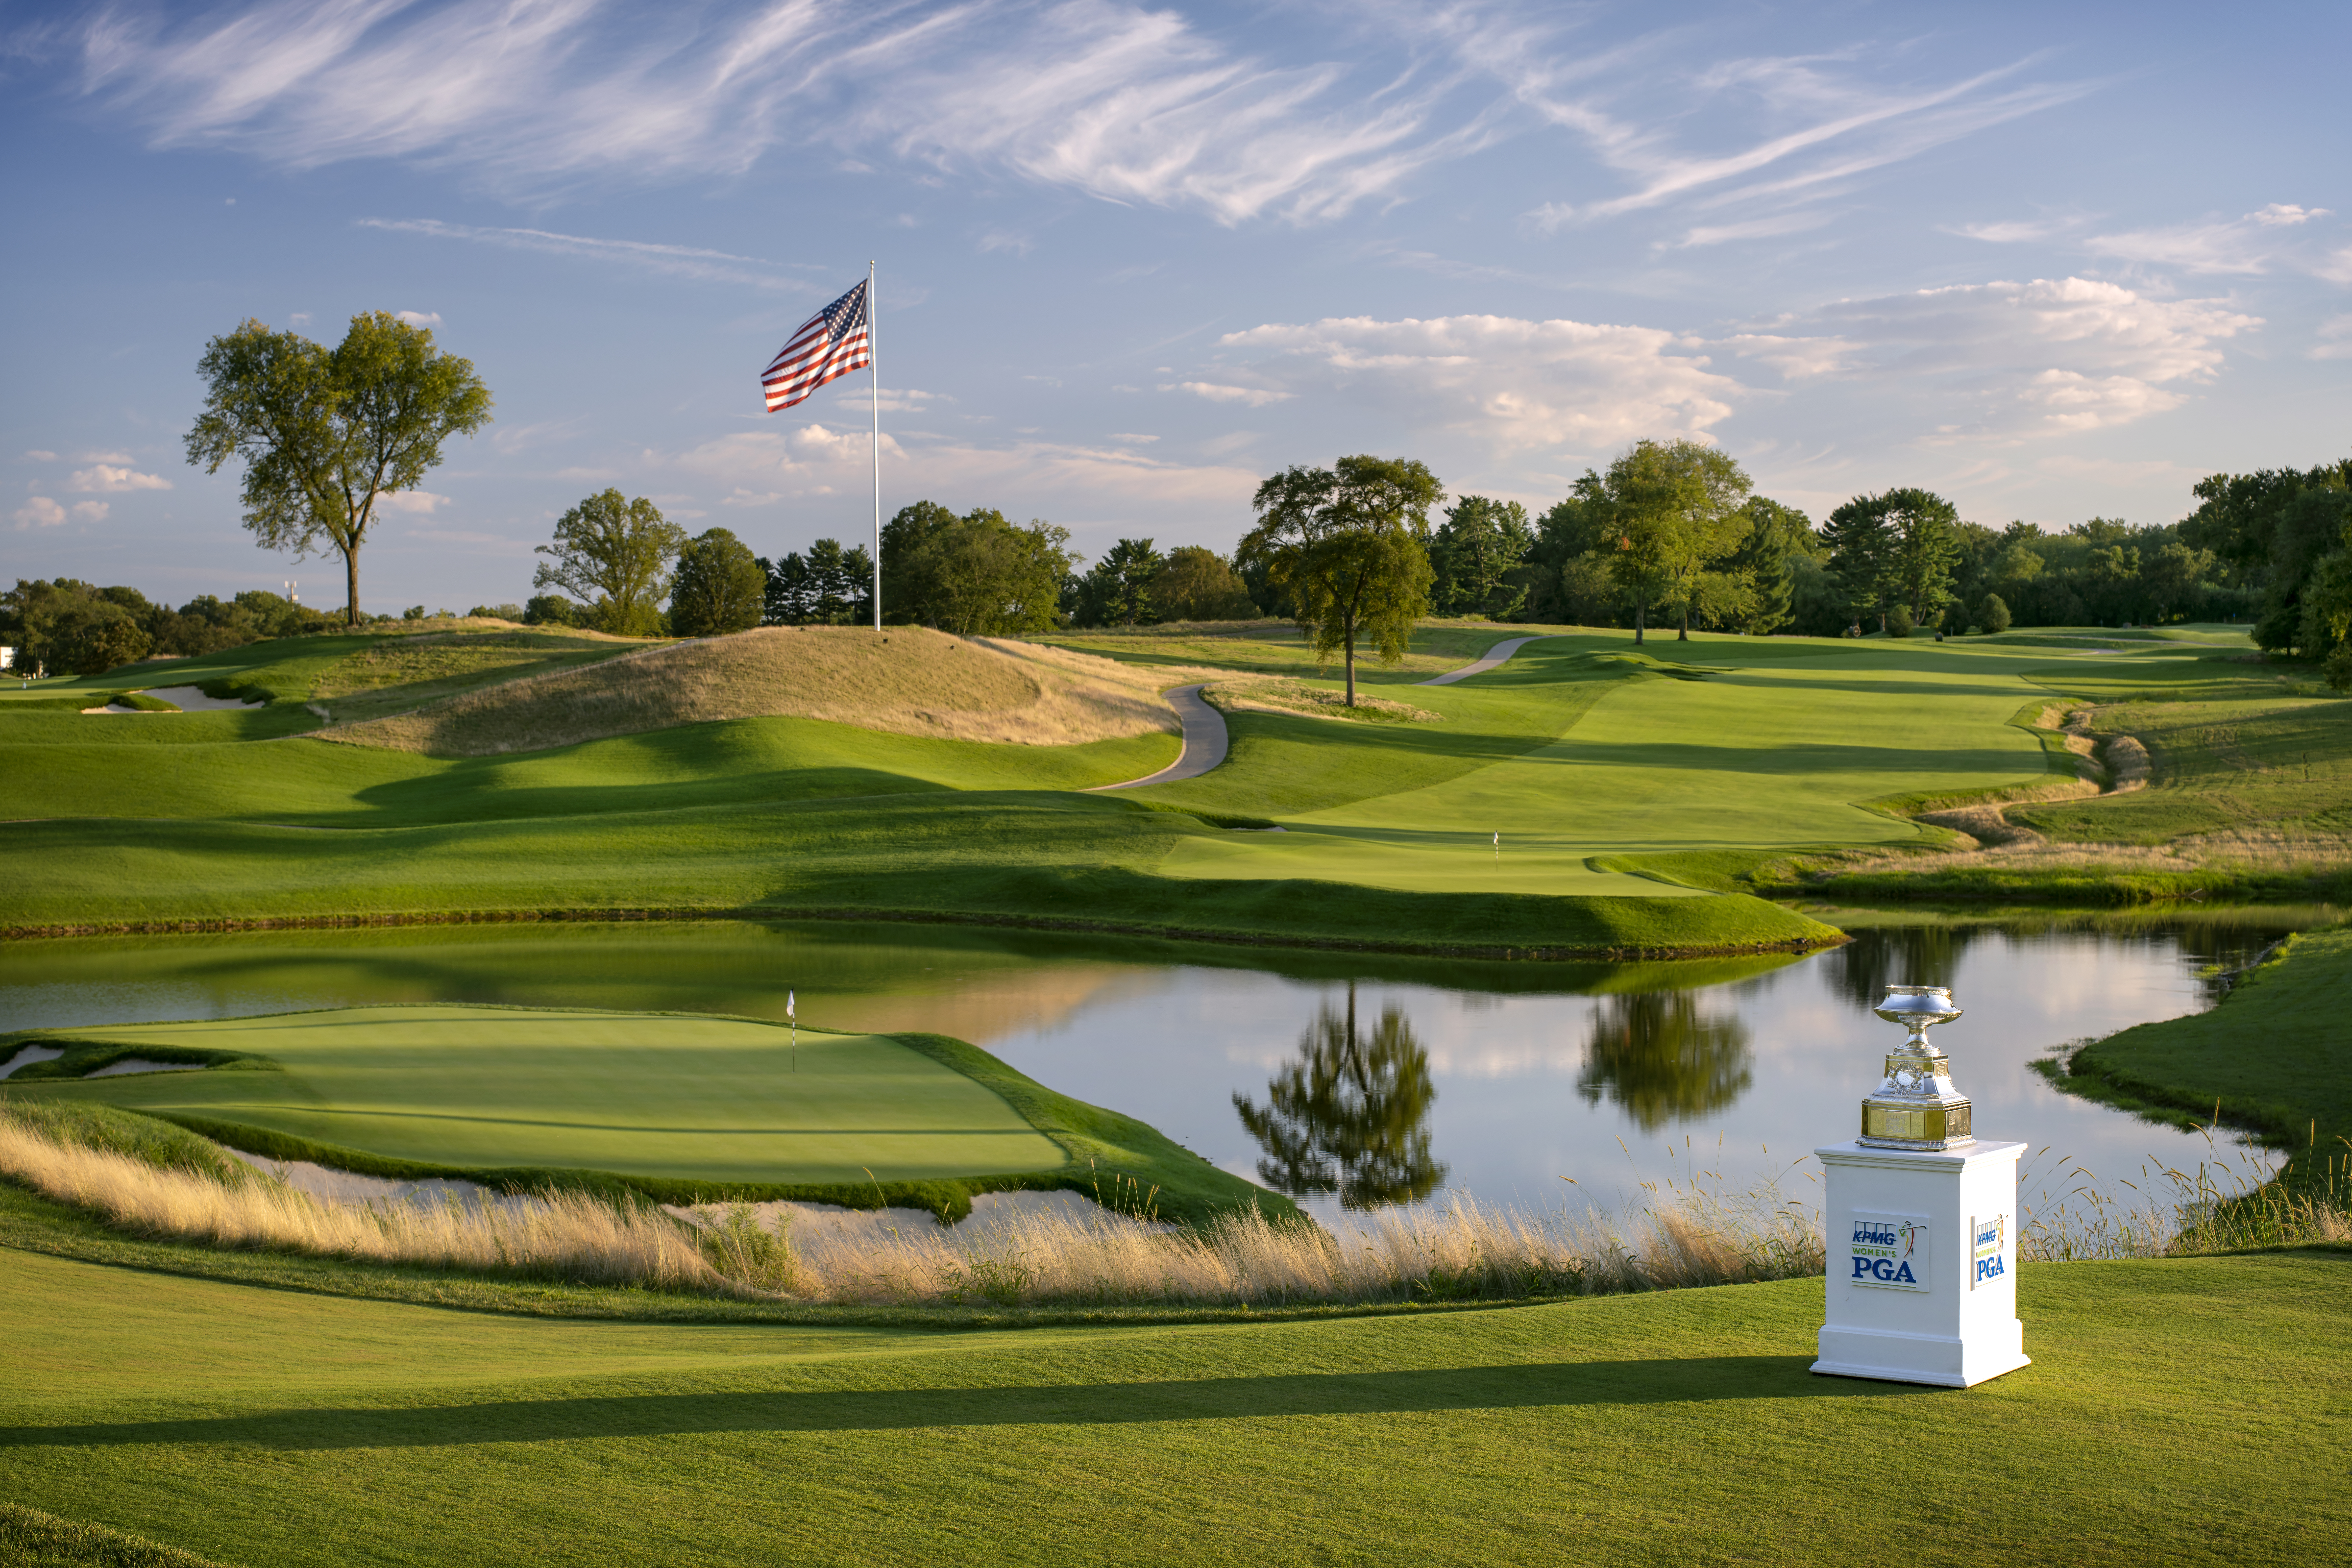 Congressional Country Club hosts the 2022 KPMG Women's PGA Championship